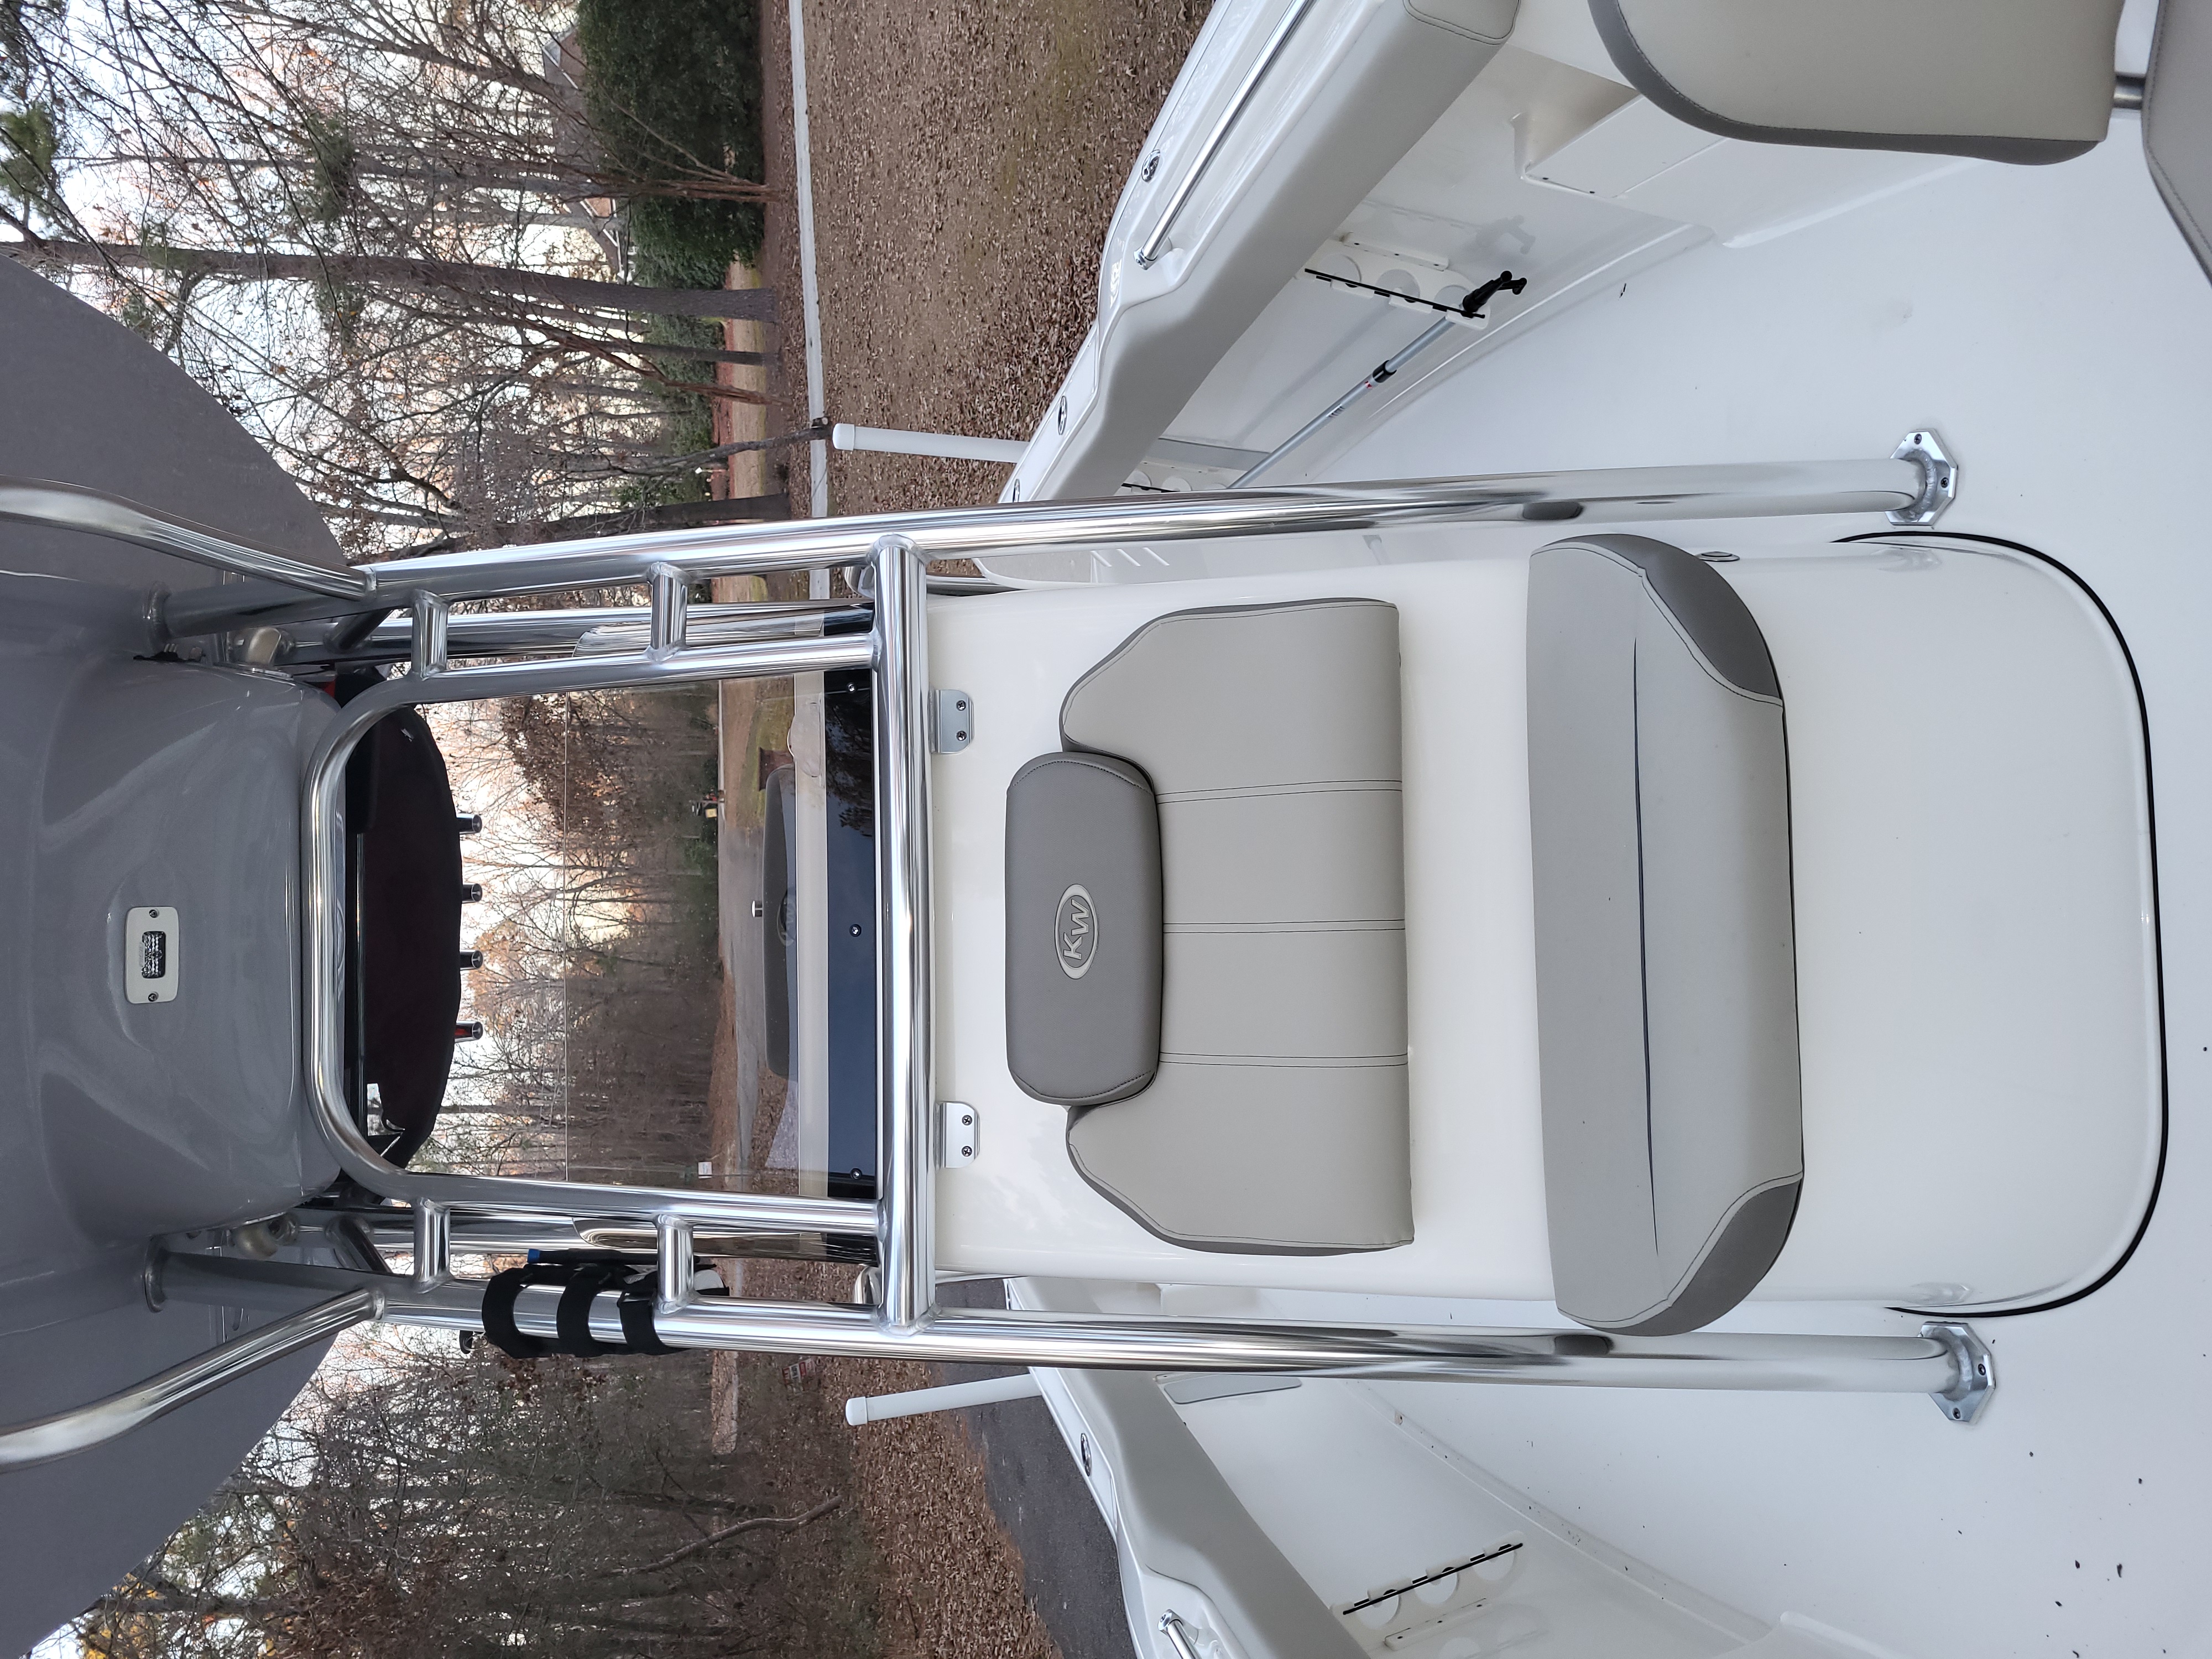 2022 Key West 239FS Power boat for sale in Laurinburg, NC - image 24 